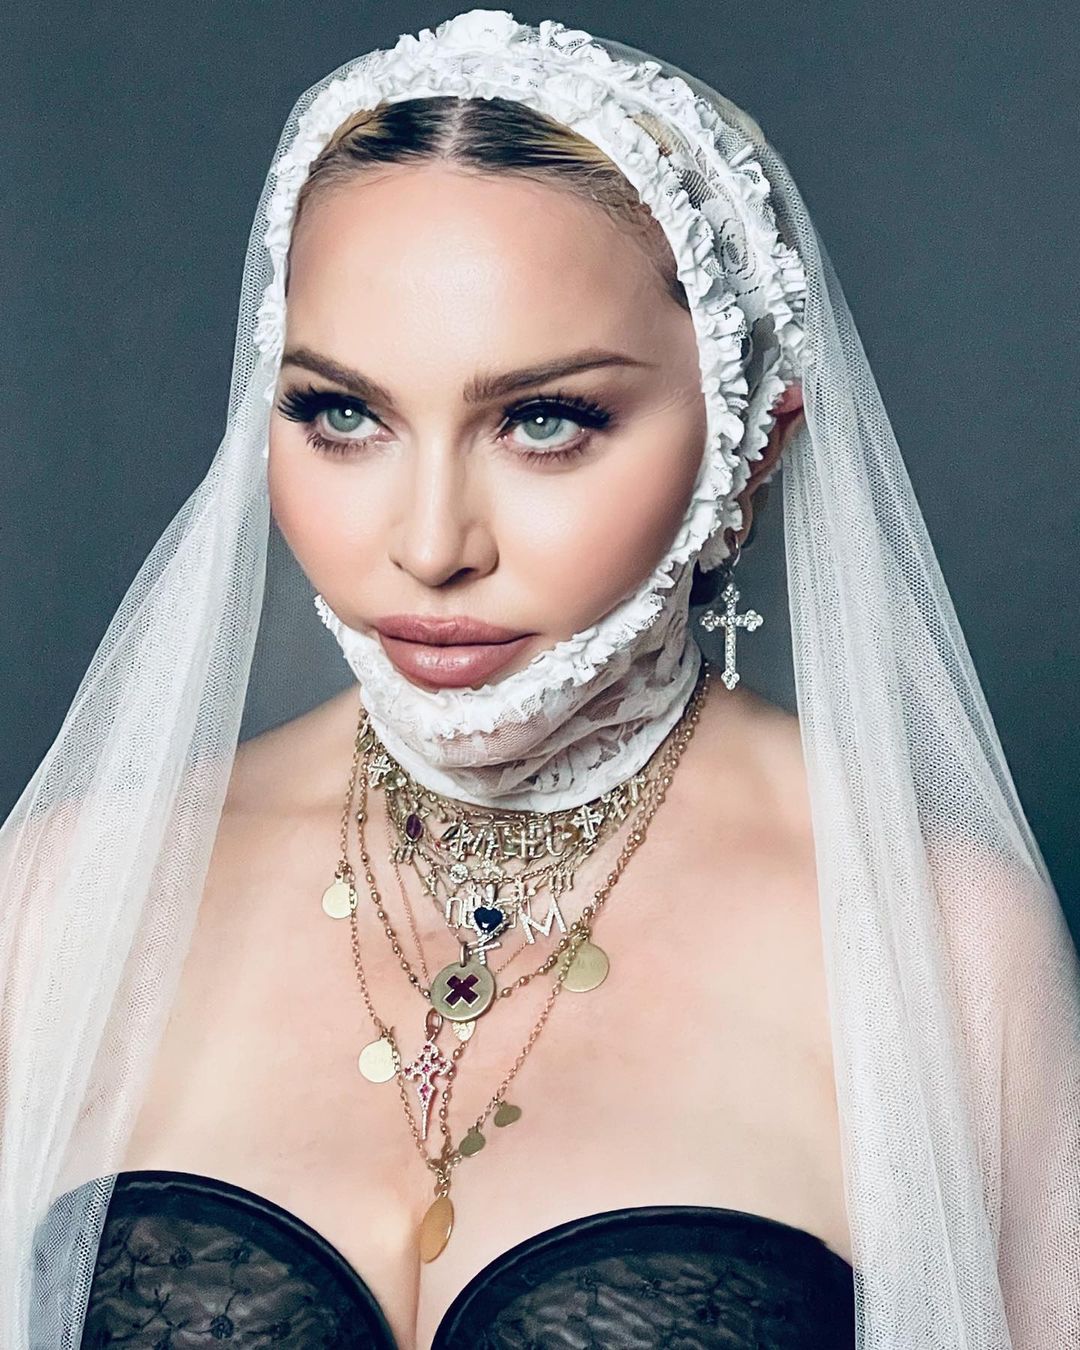 Madonna is The Bride! - Photo 13